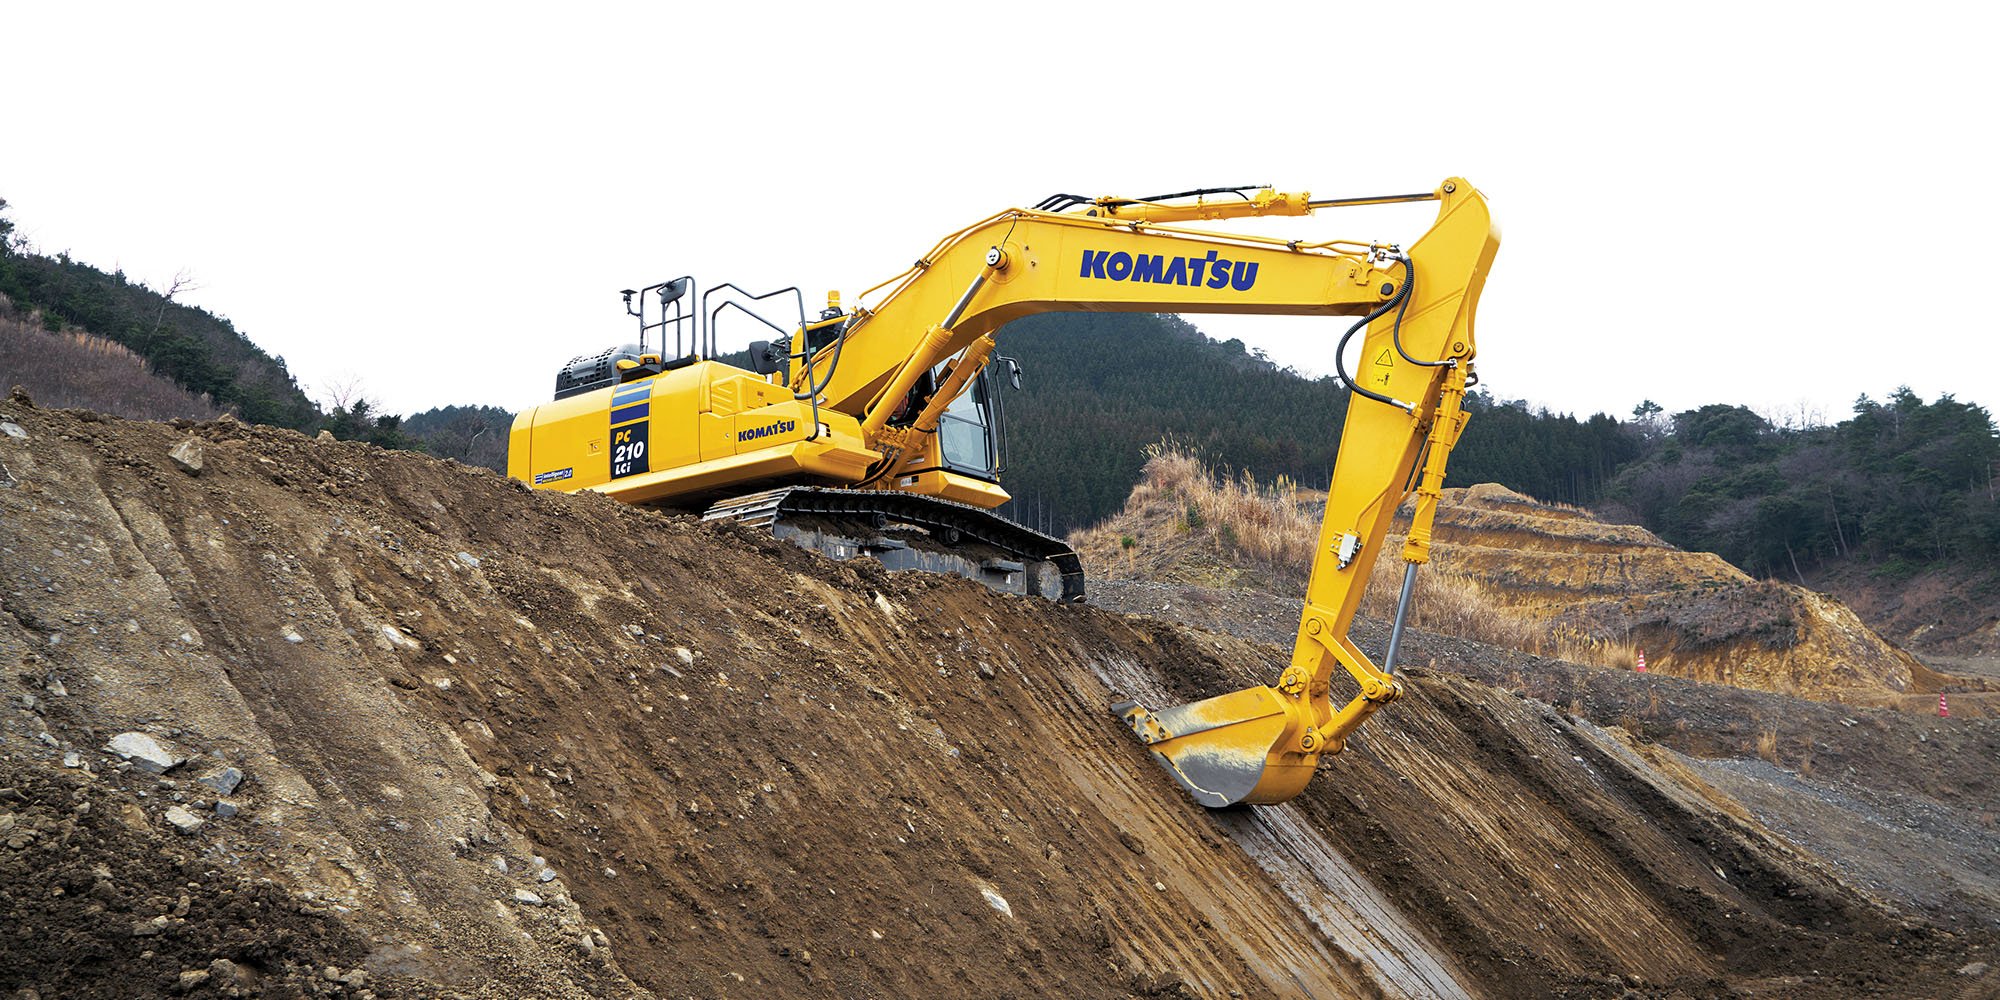 New iMC 2.0 Excavator Delivers Greater Accuracy, Comfort and Versatility for Increased Productivity